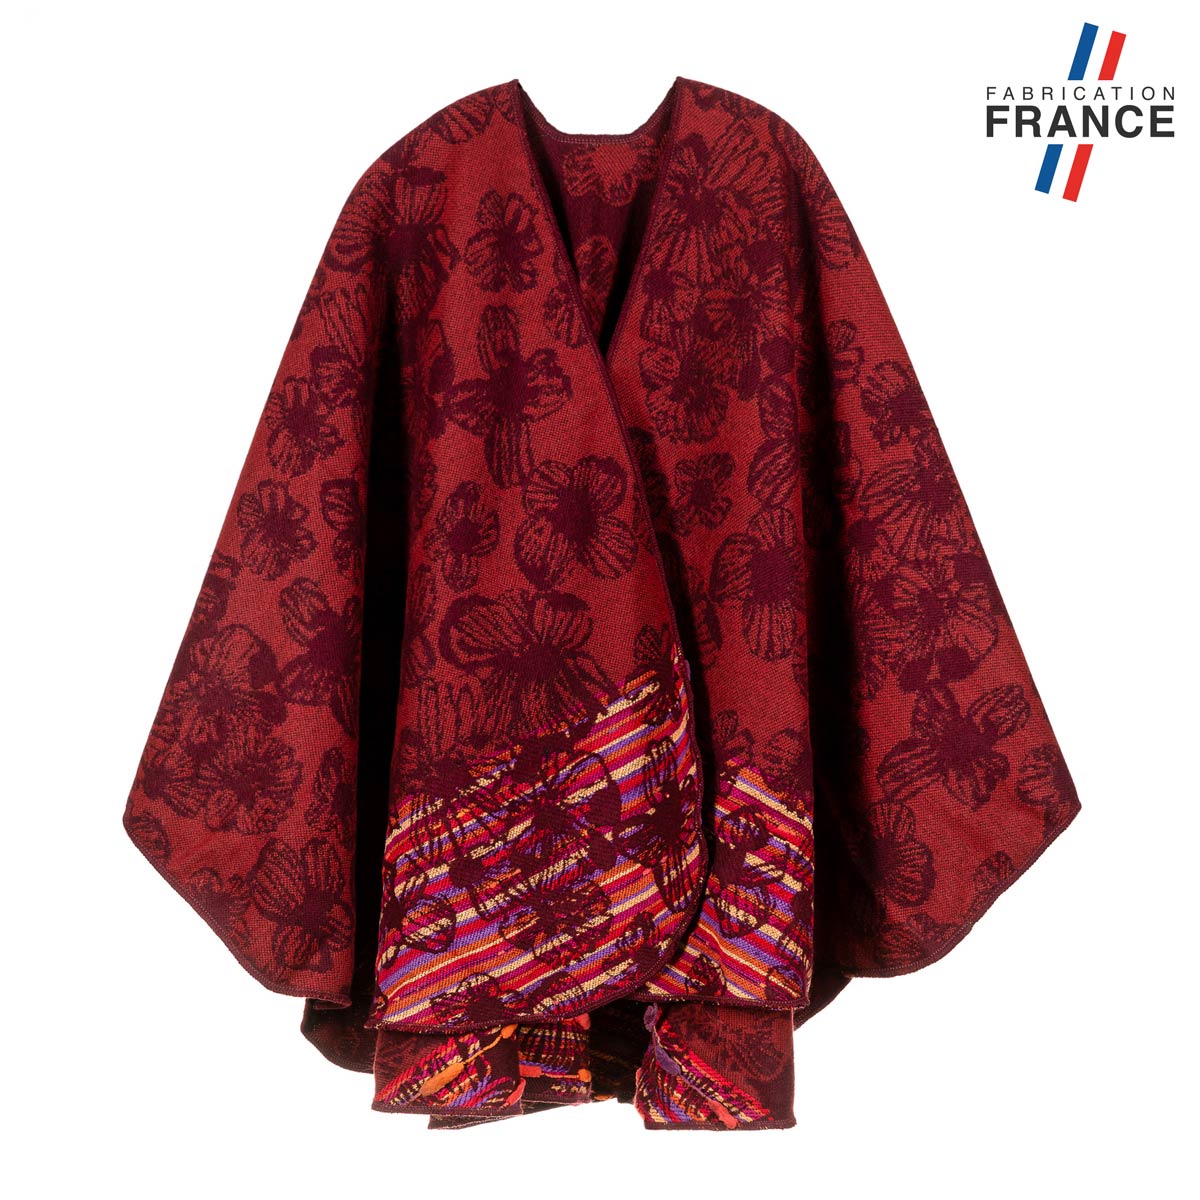 Poncho-hiver-bordeaux-made-in-France--AT-06174_F1-12FR